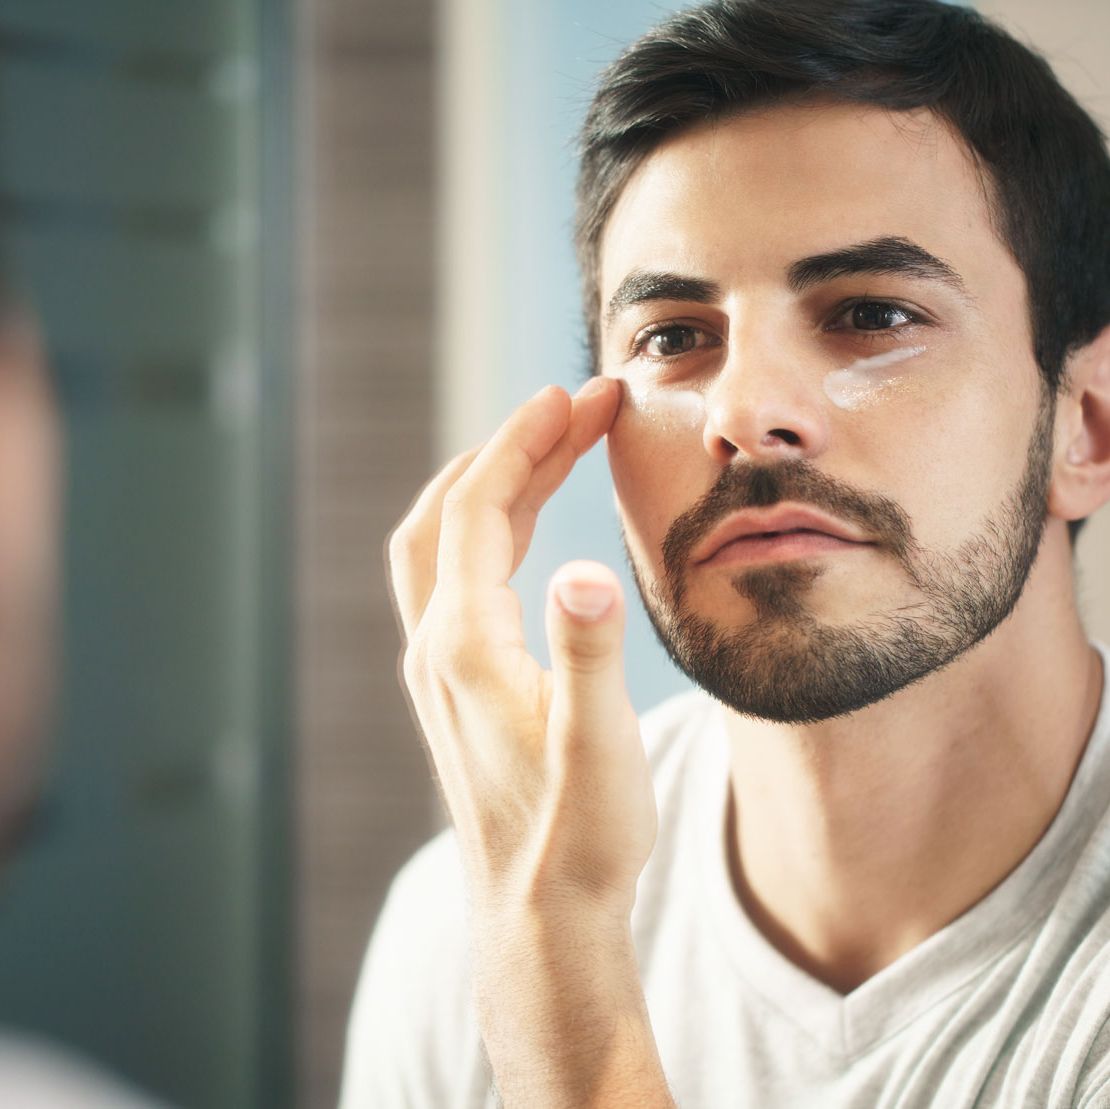 The 15 Best Eye Creams for Men, According to Your Age